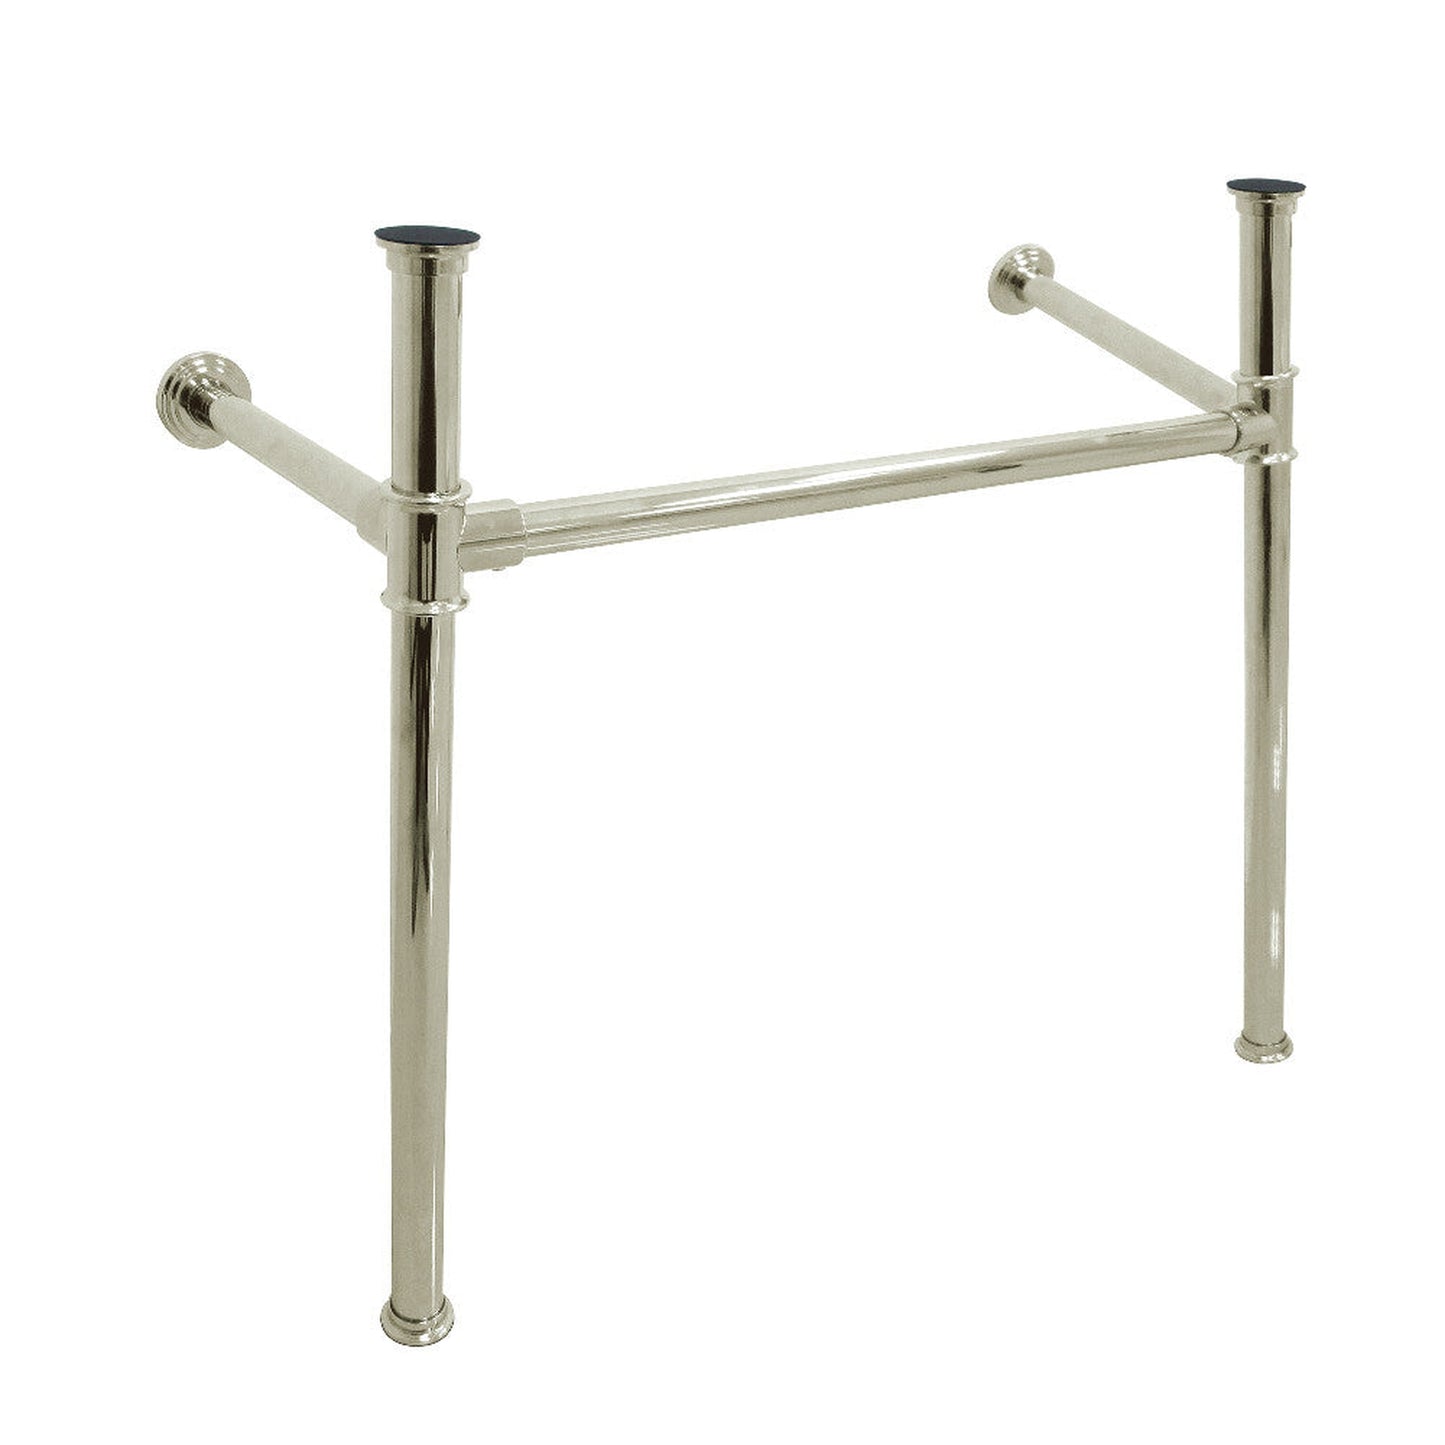 Kingston Brass VPB13686 Fauceture Stainless Steel Console Sink Legs, Polished Nickel